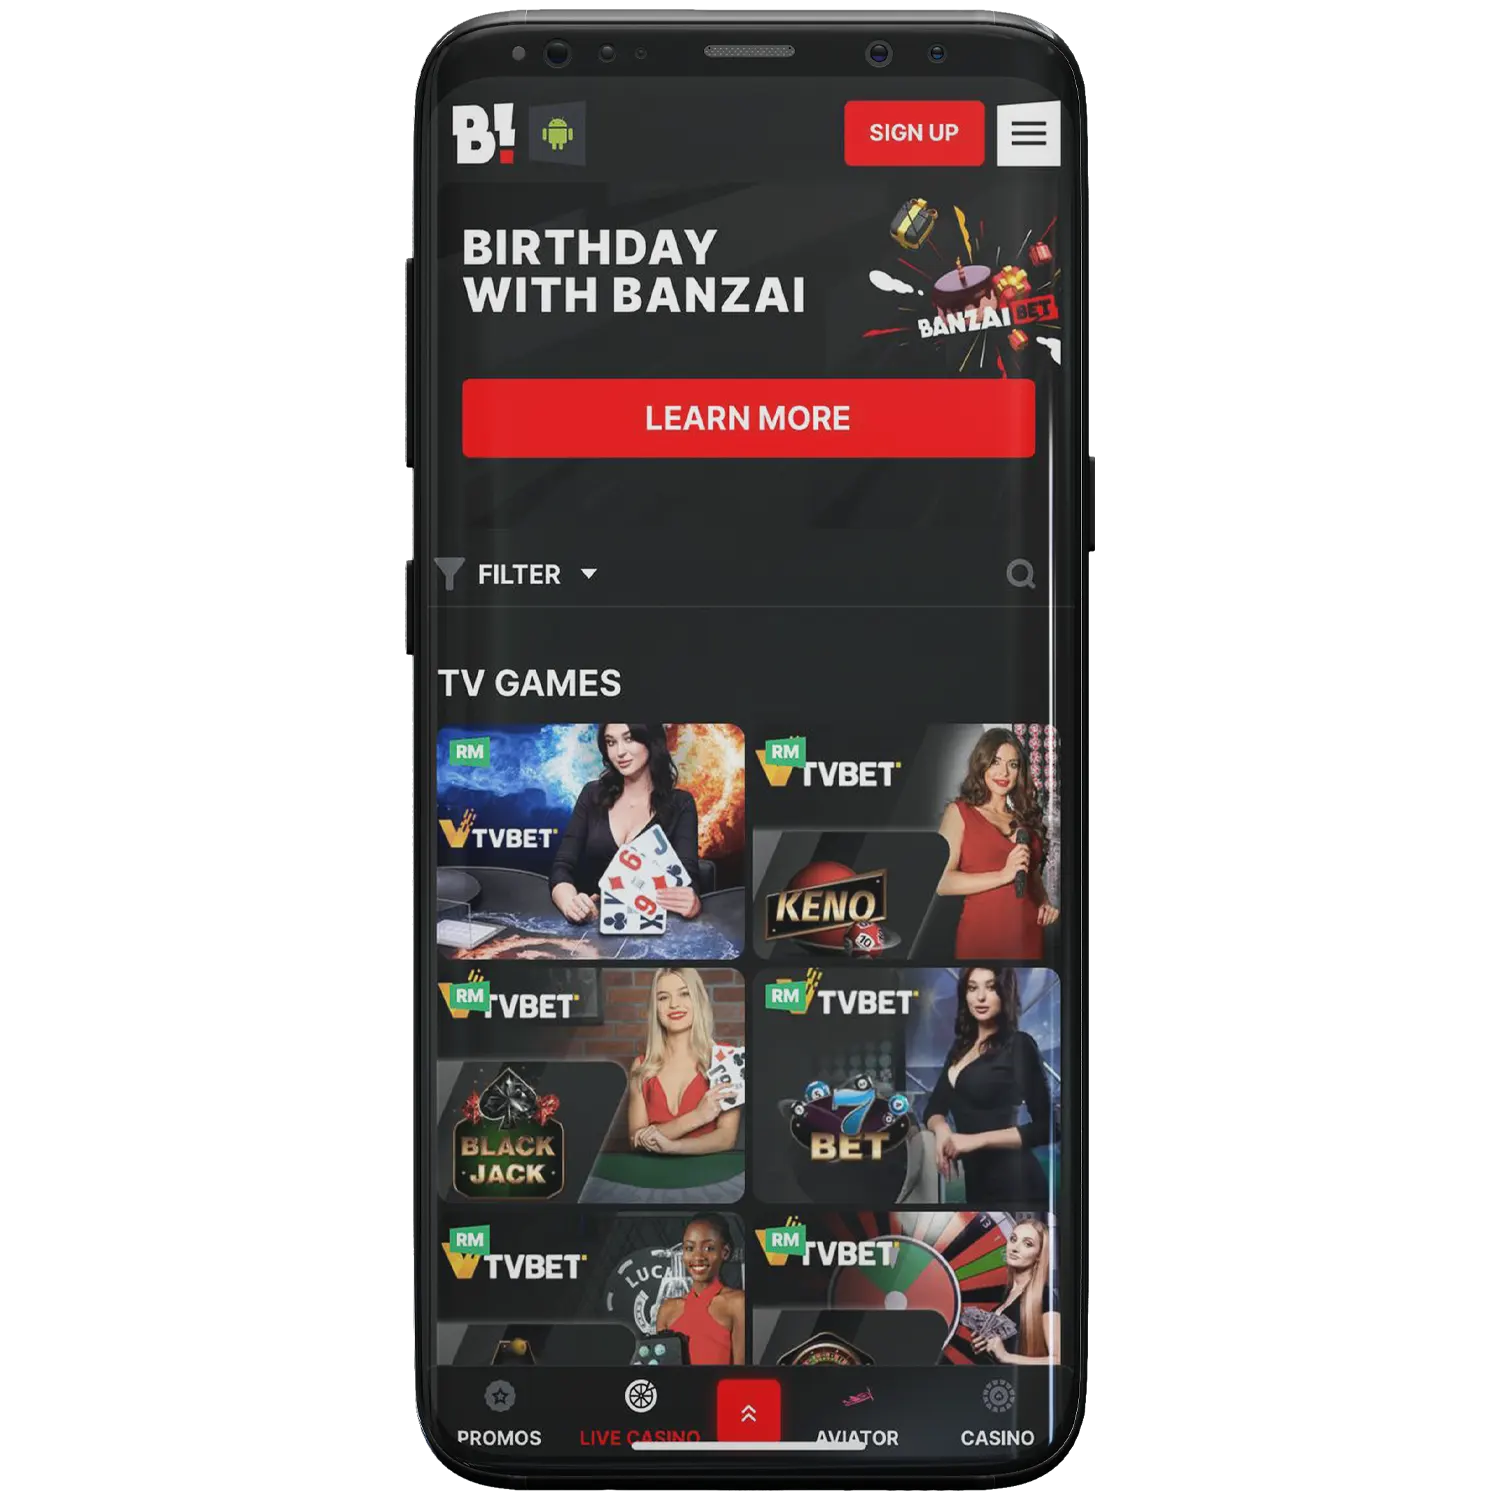 Place your bets and play at Banzai Bet using your mobile device.